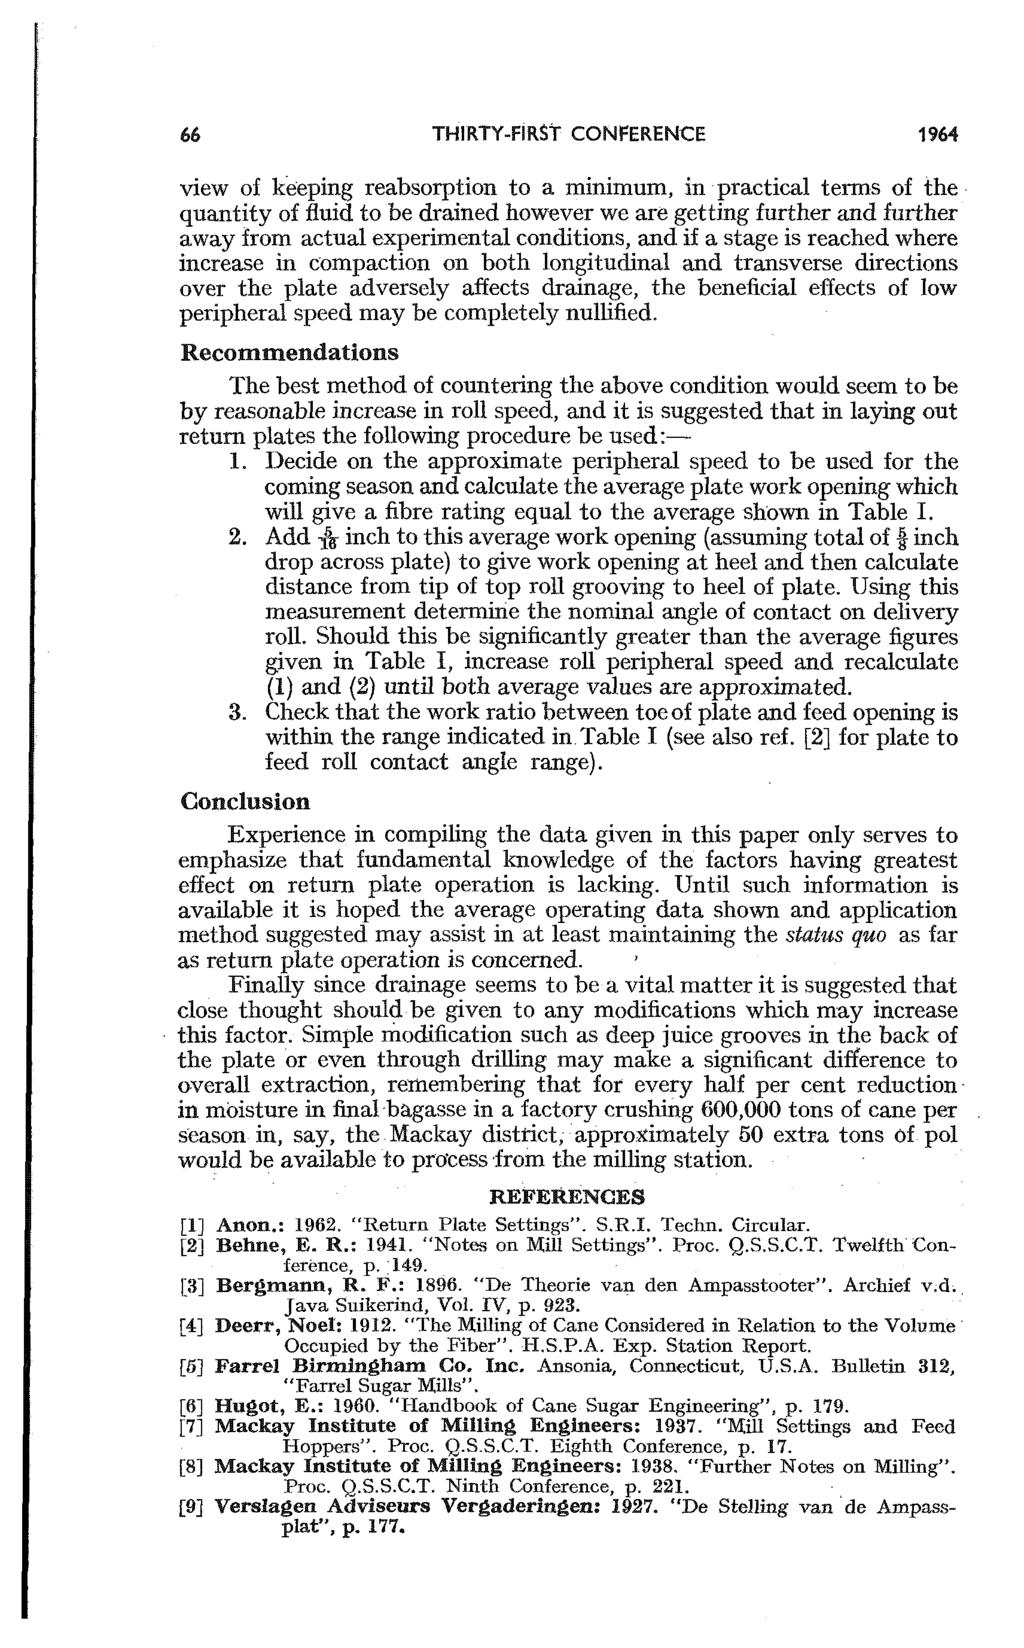 66 THIRTYFIRST CONFERENCE 1964 view of keeping reabsorption to a minimum, in practical terms of the quantity of fluid to be drained however we are getting further and further away from actual